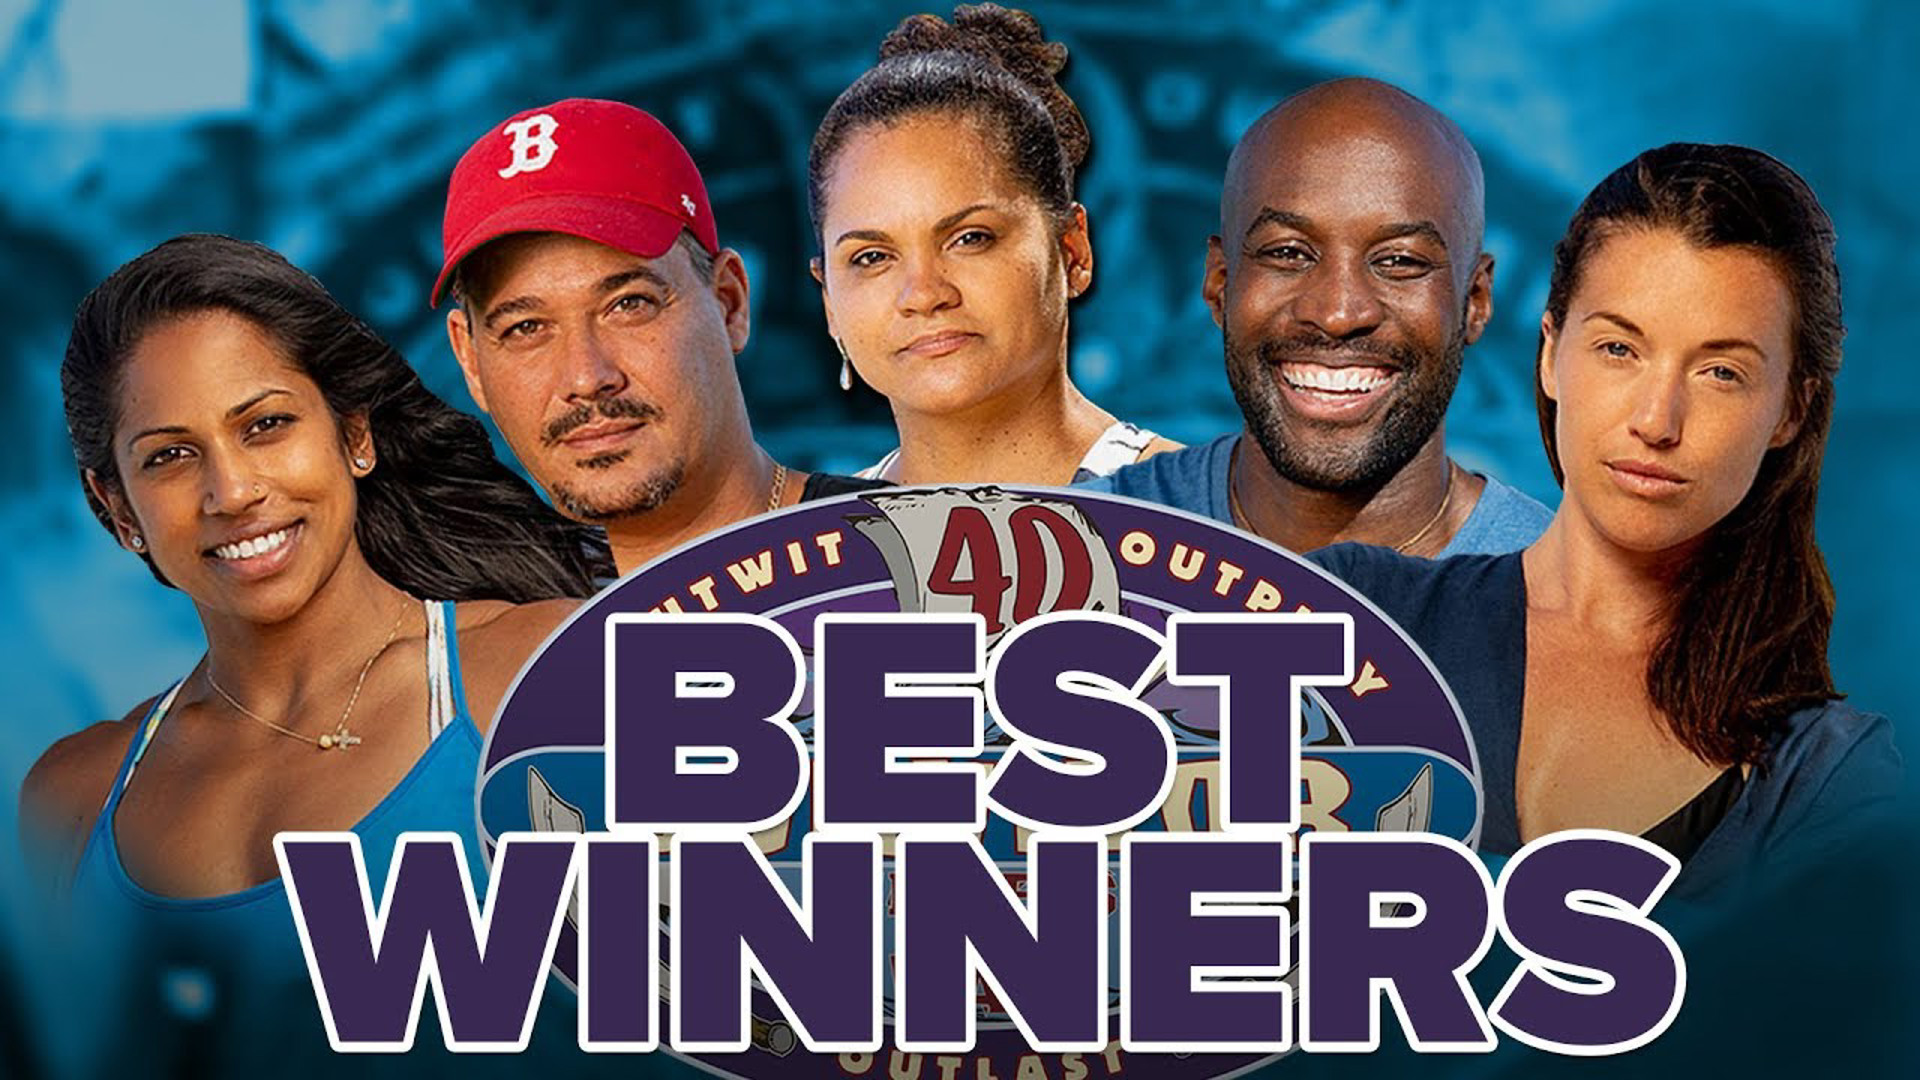 Filmed right before Tony won twice, here's our rankings for the best Survivor winners of all time!